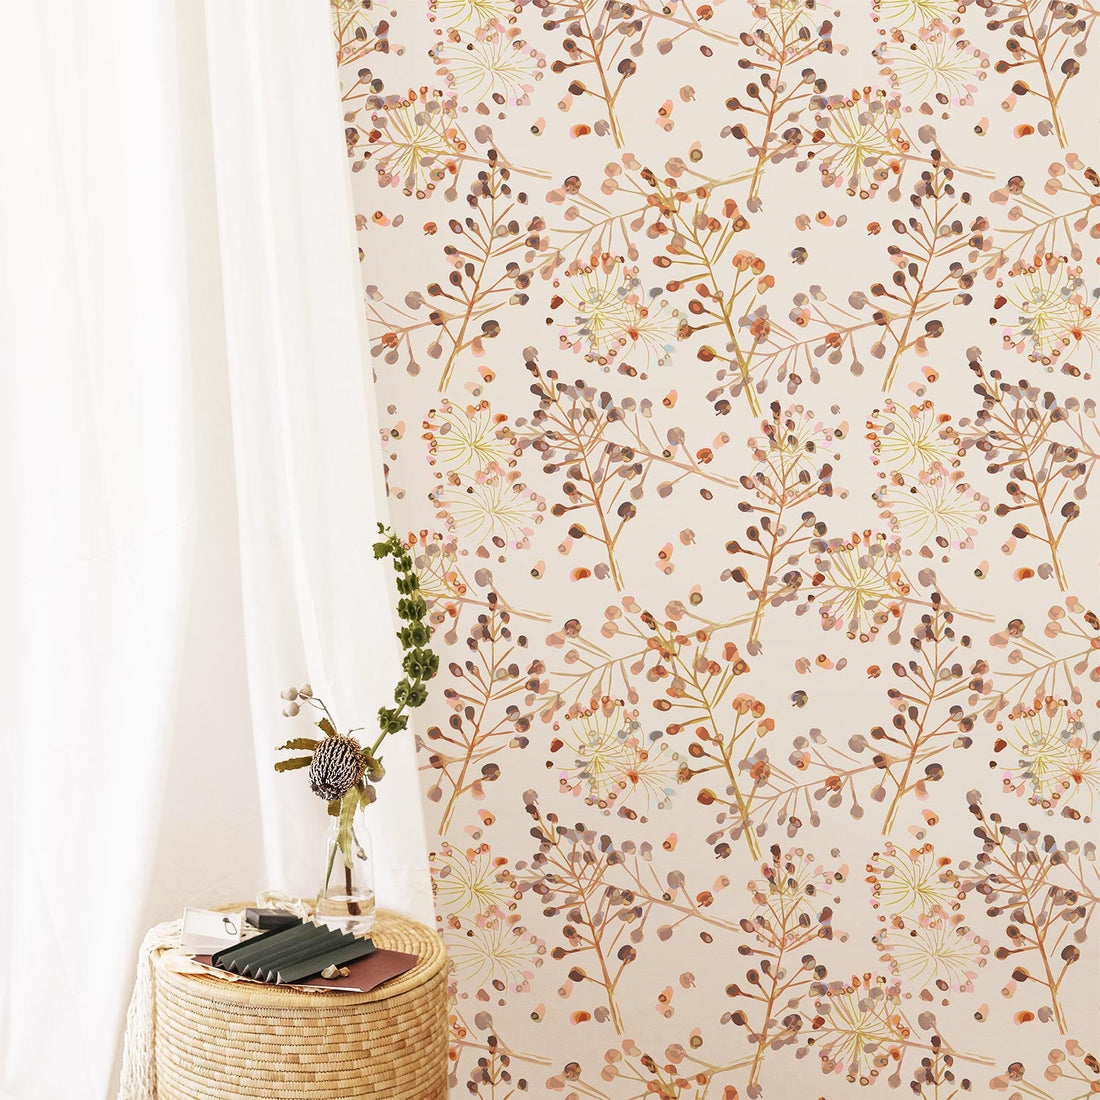 Autumn color palette removable wallpaper in bohemian girl's room with flowers and rattan furniture